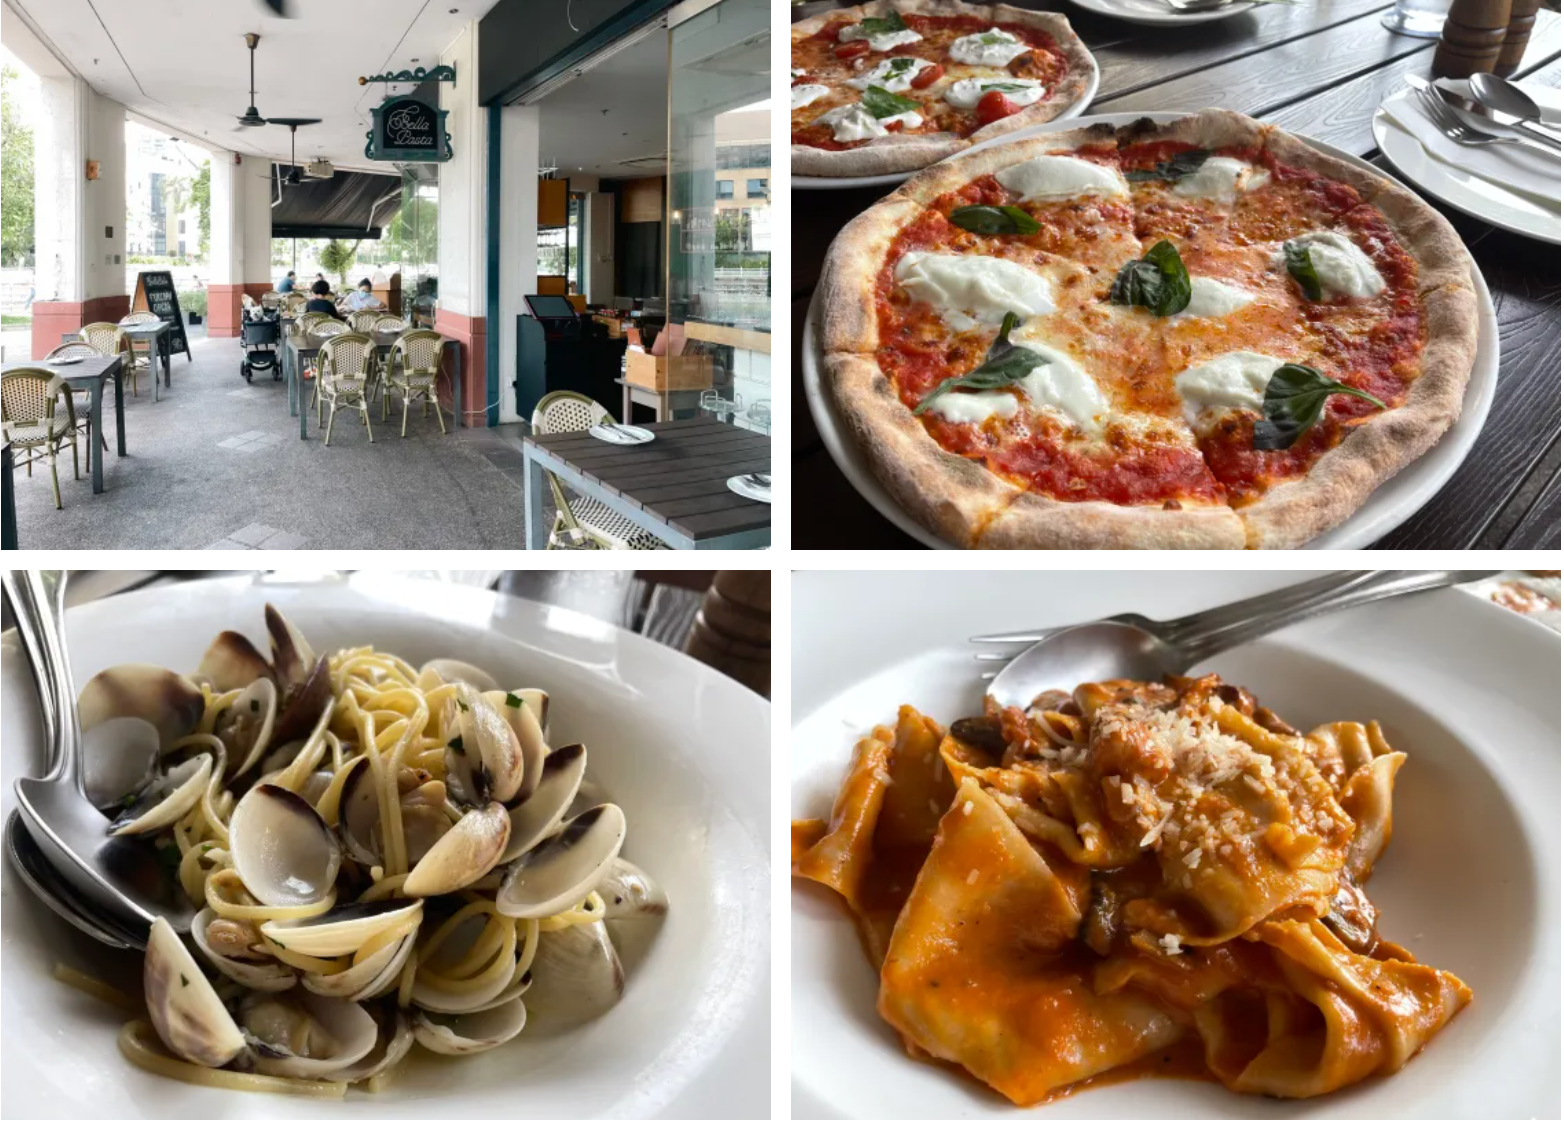 Food and outdoor seating at Belle Pasta